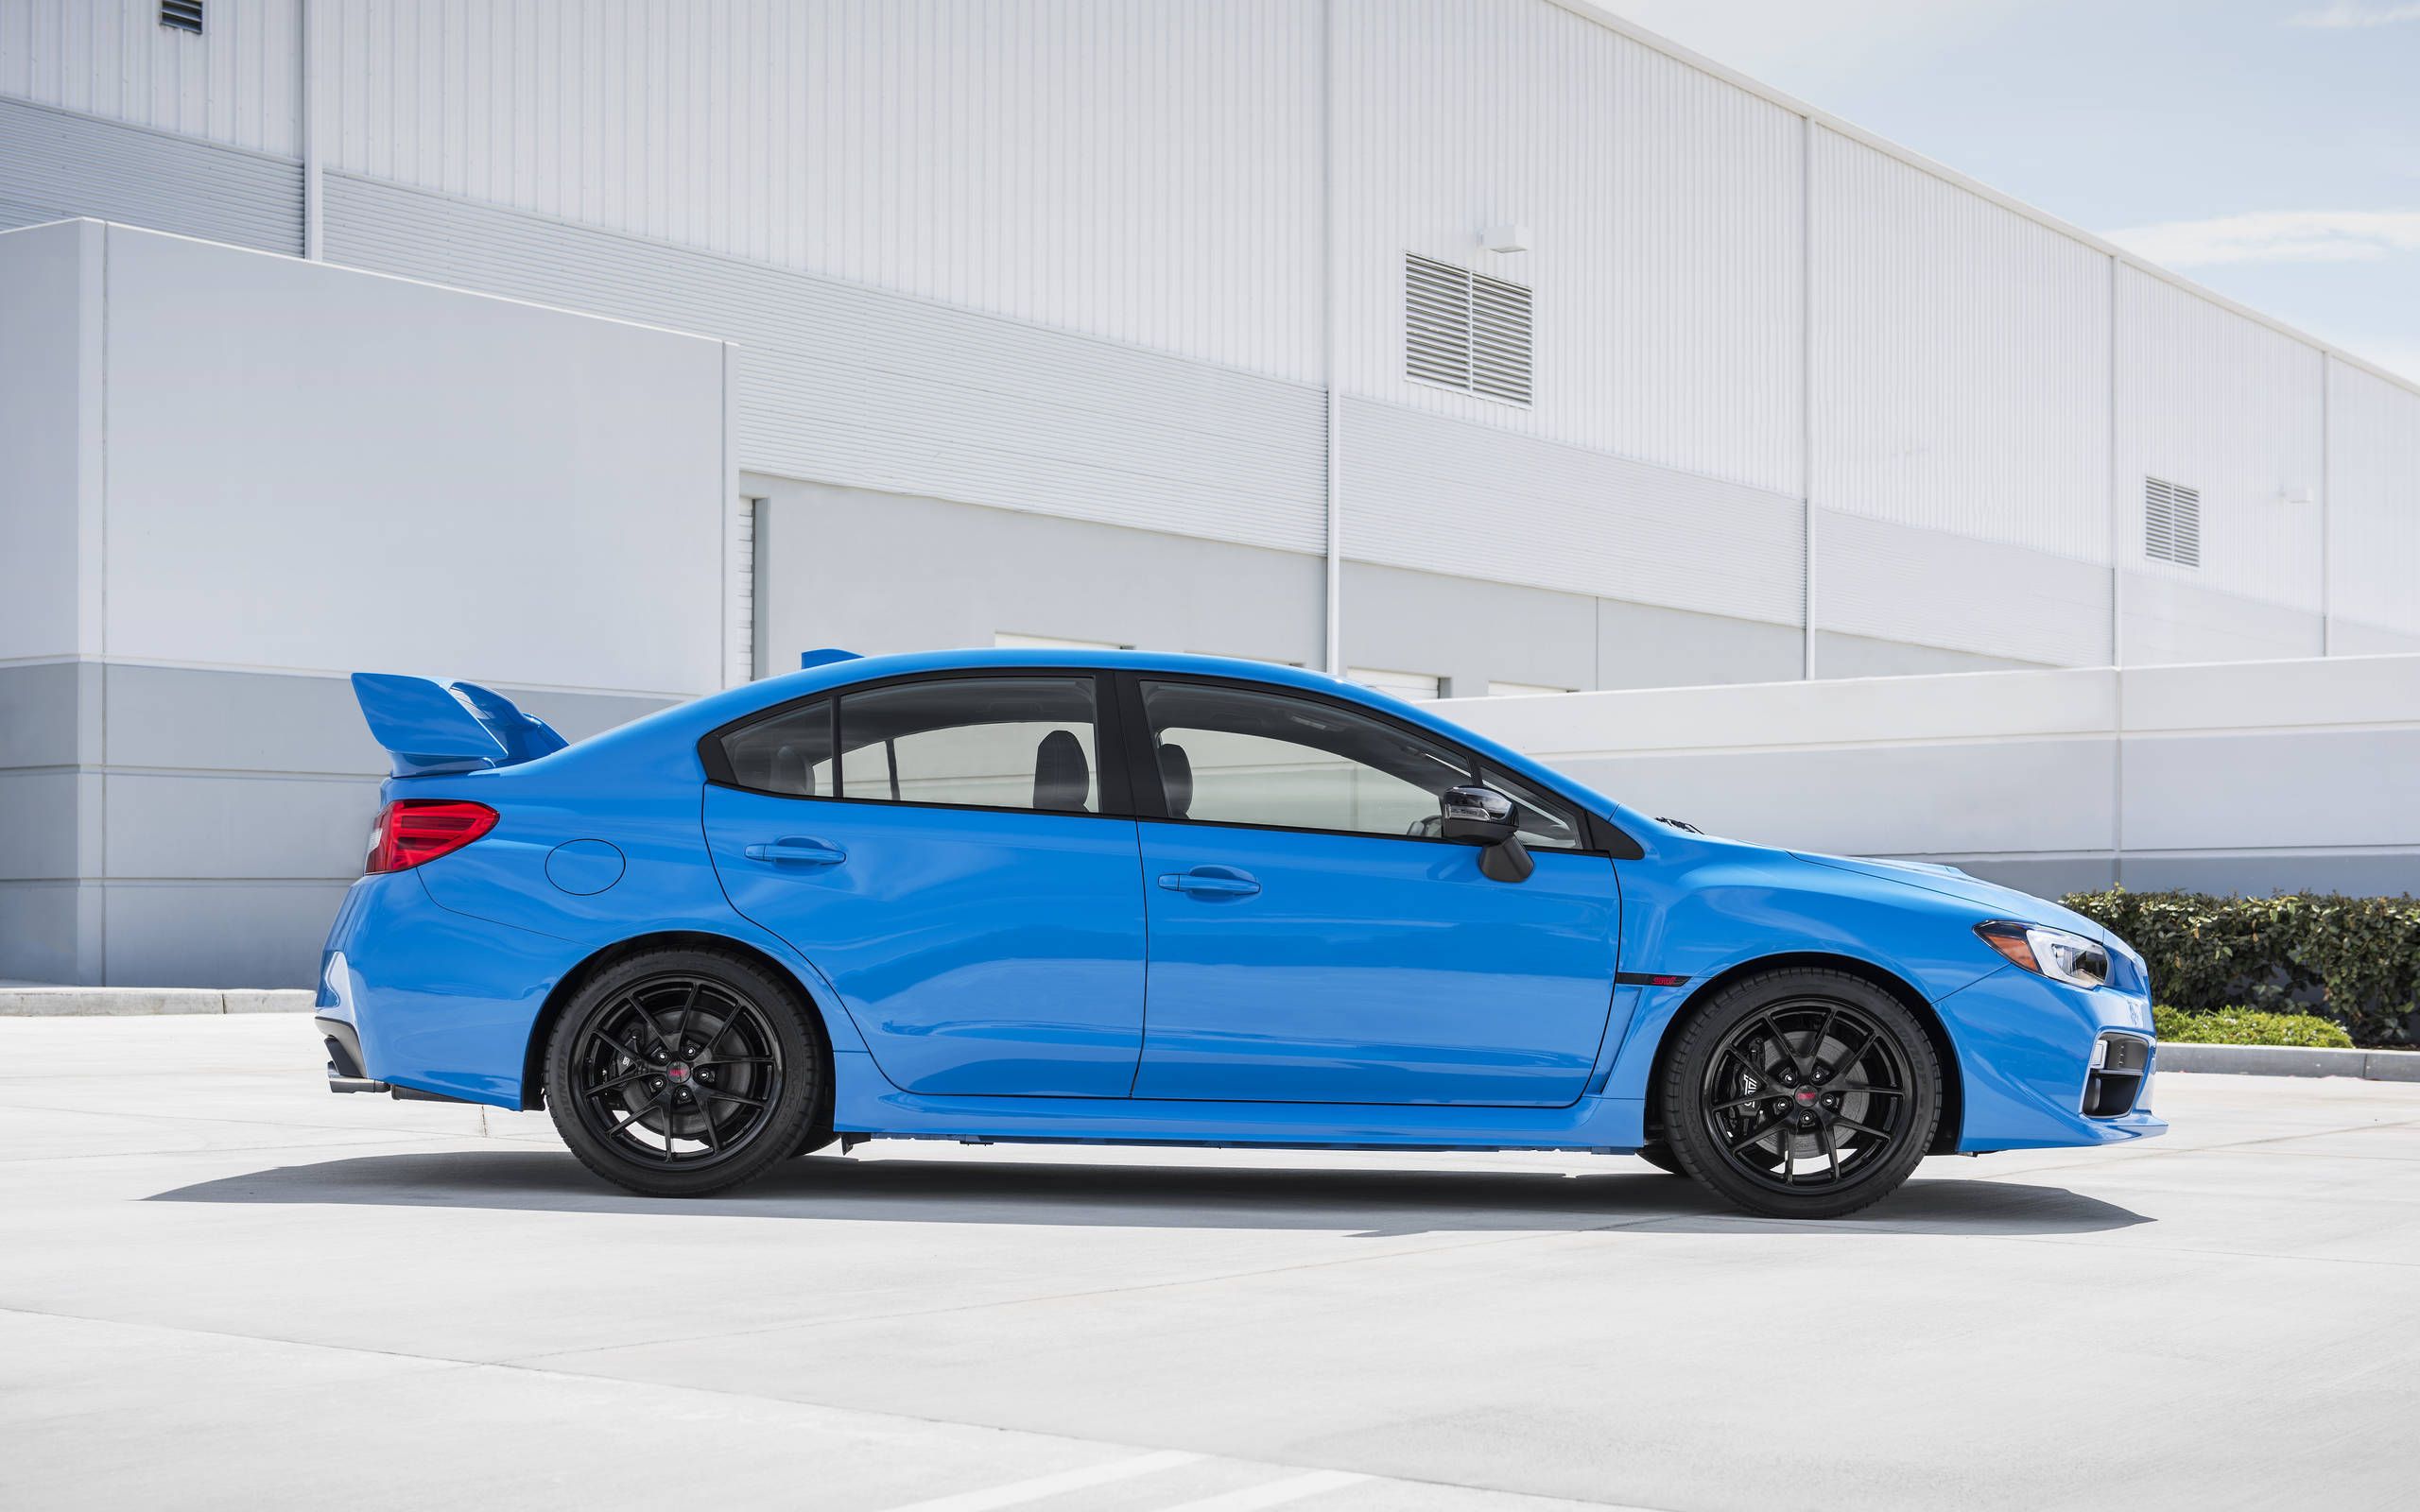 16 Subaru Wrx Sti Limited Review Notes Purpose Built For The Hardcore